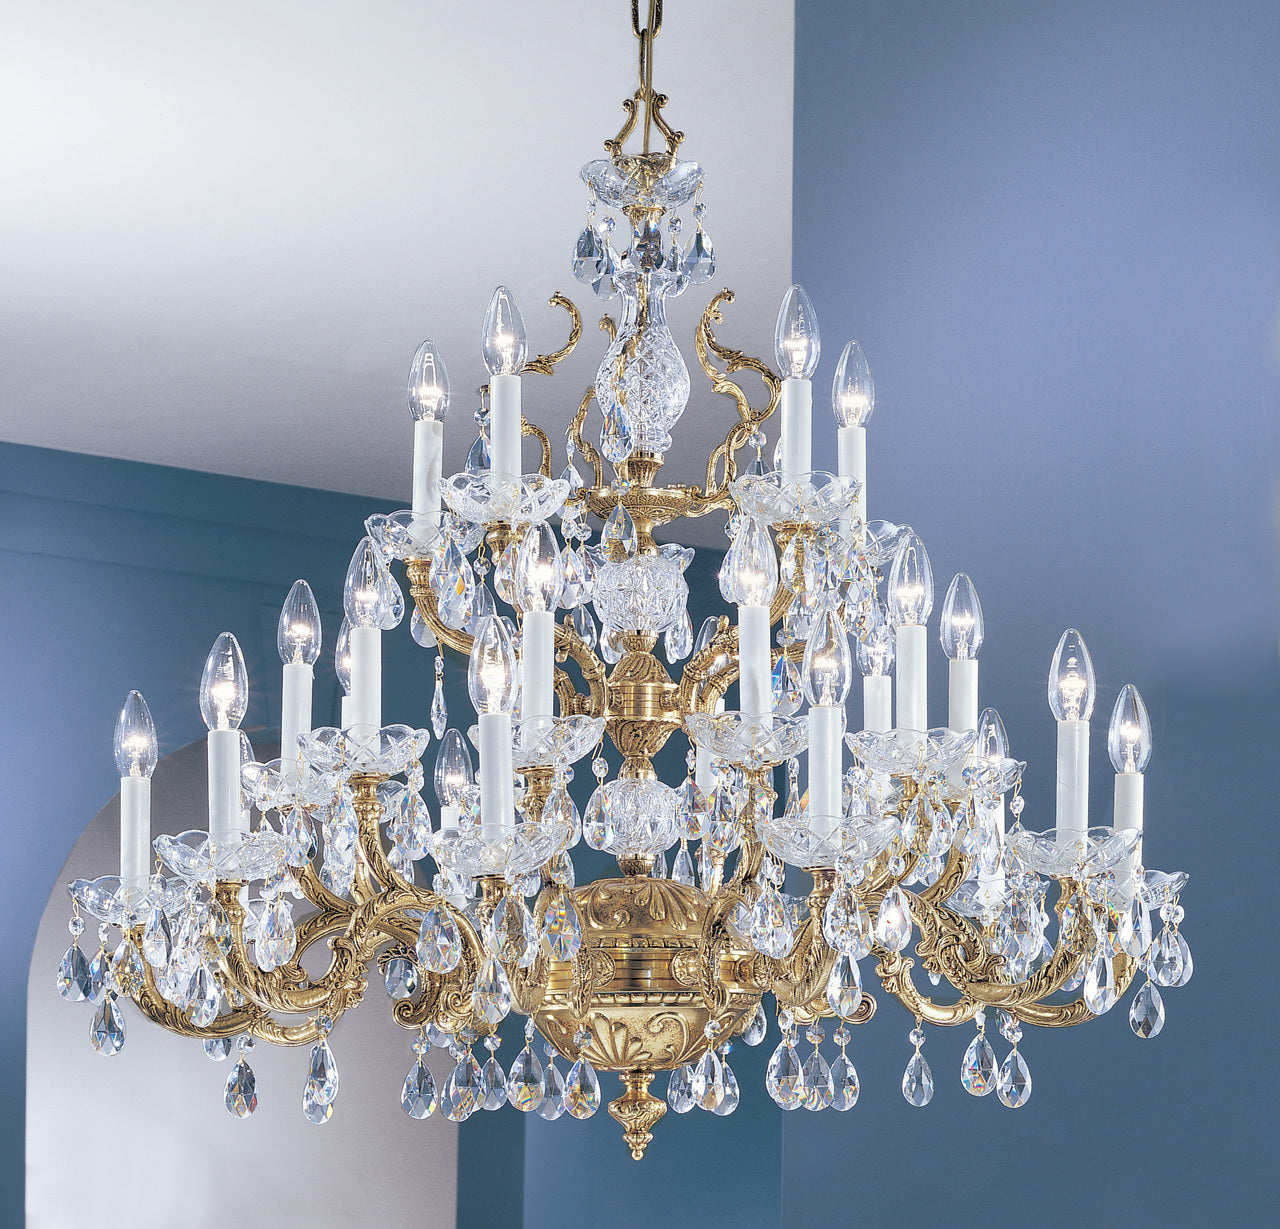 Classic Lighting 5535 OWB PAM Madrid Crystal/Cast Brass Chandelier in Olde World Bronze (Imported from Spain)